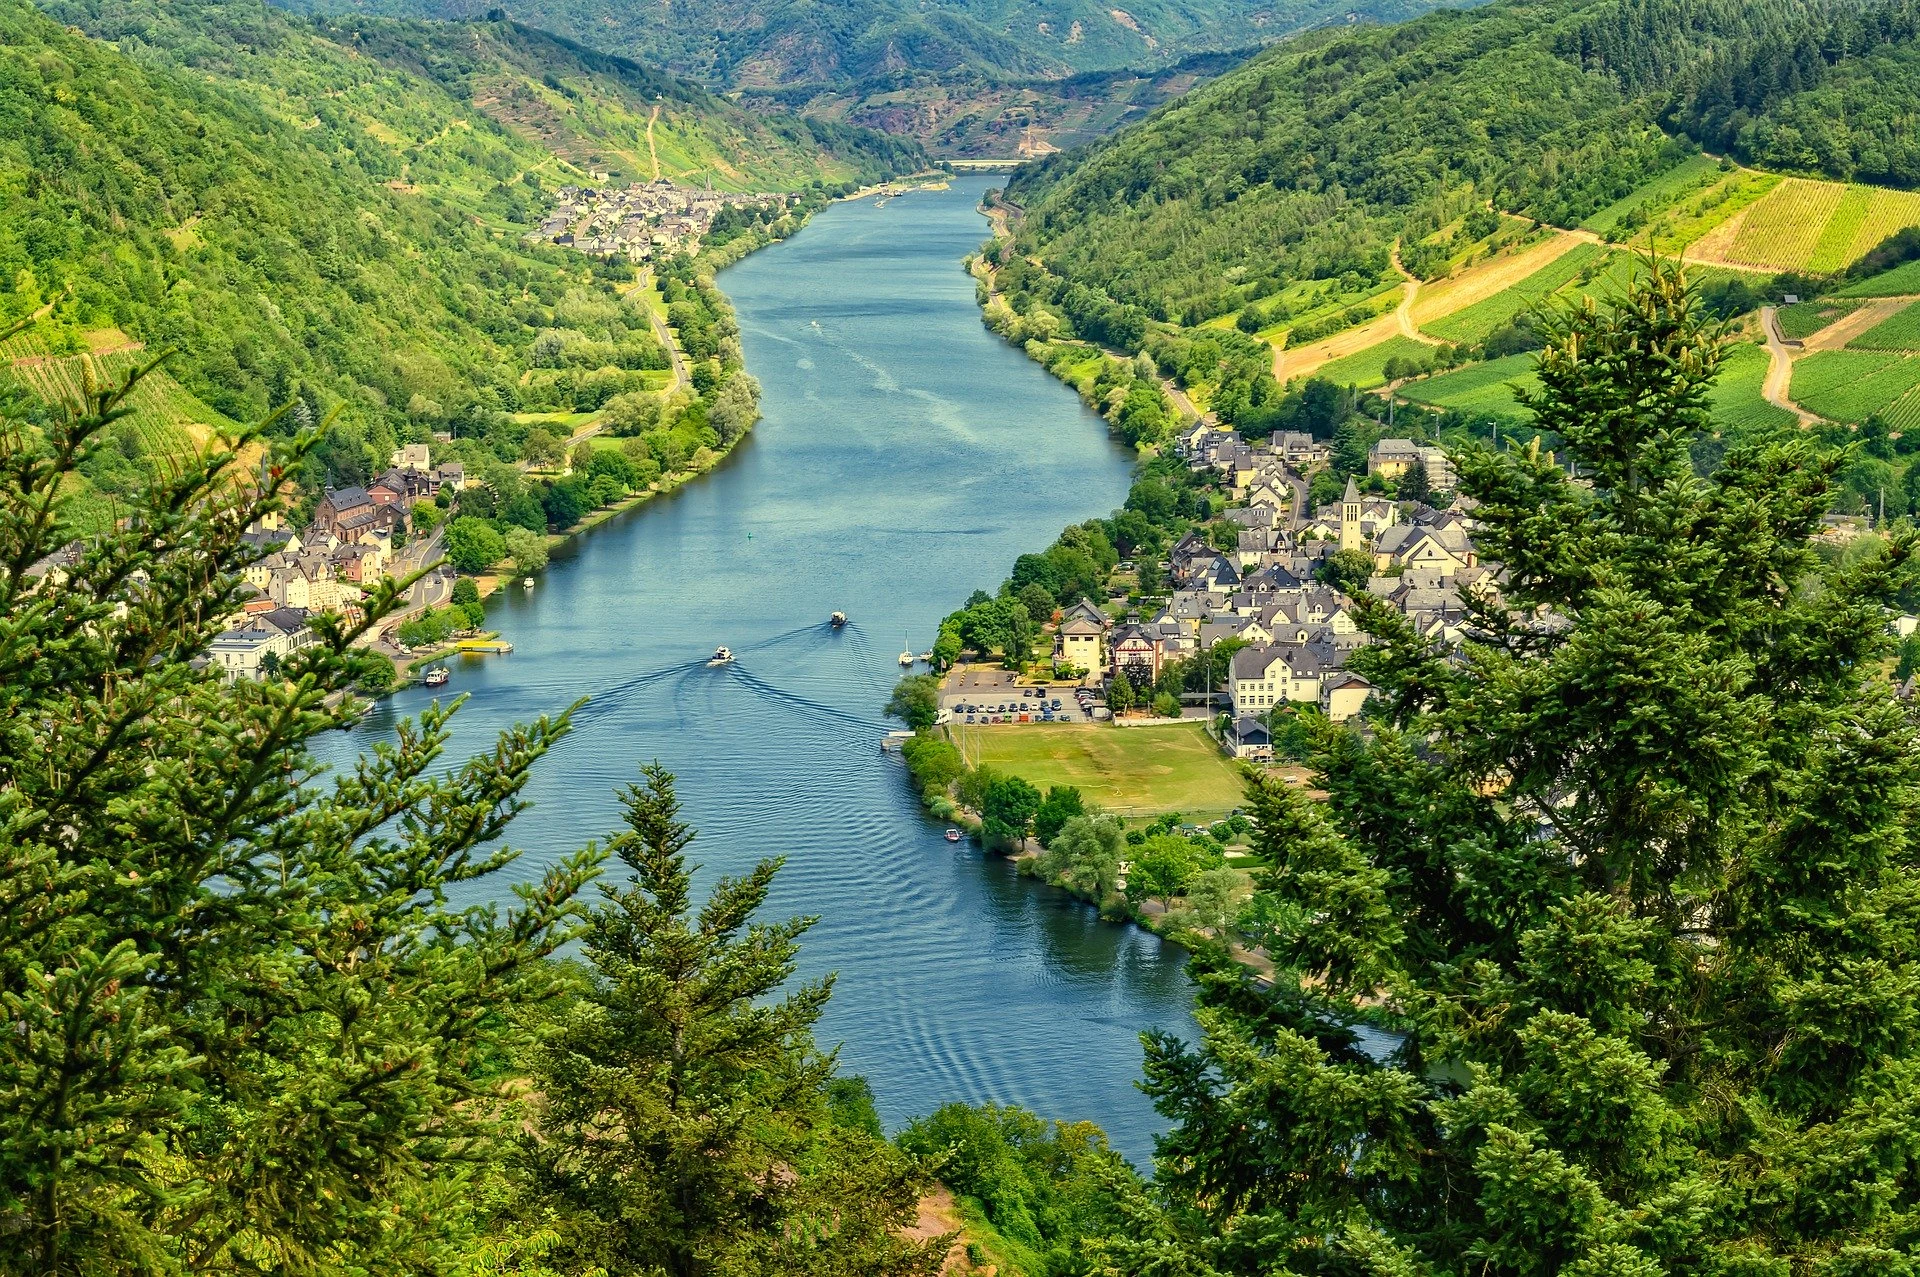 An amazing view of the Mosel valley and its vineyards